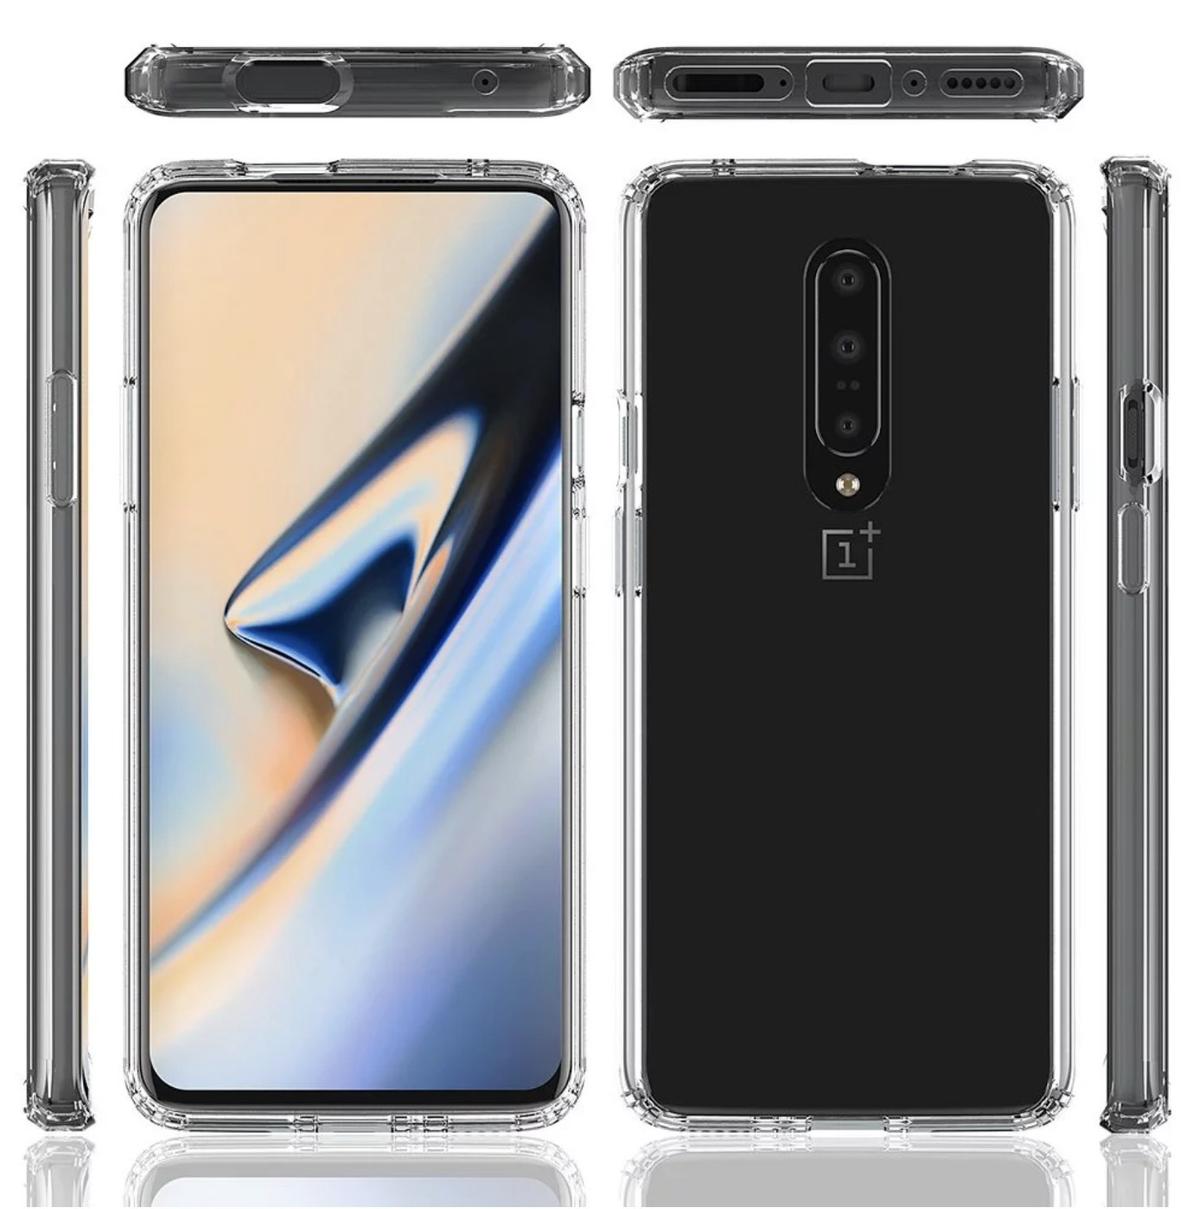 OnePlus 7 - źródło: Androidcentral class="wp-image-922260" 